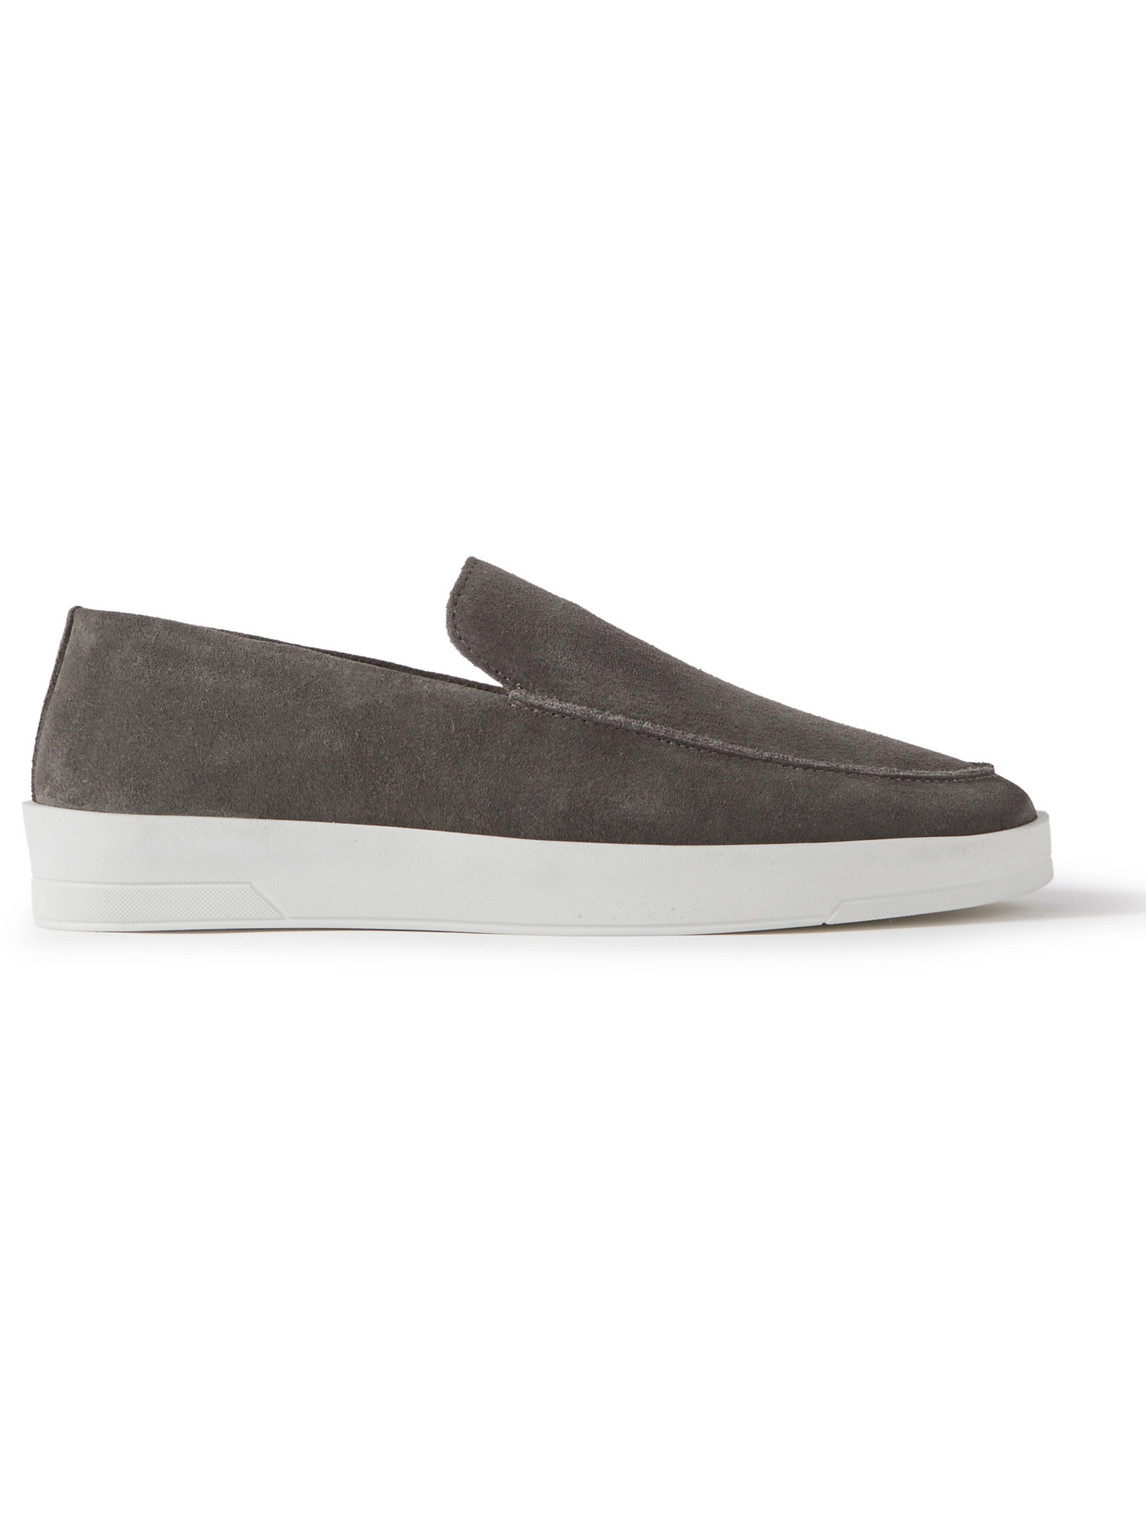 Peter Suede Loafers